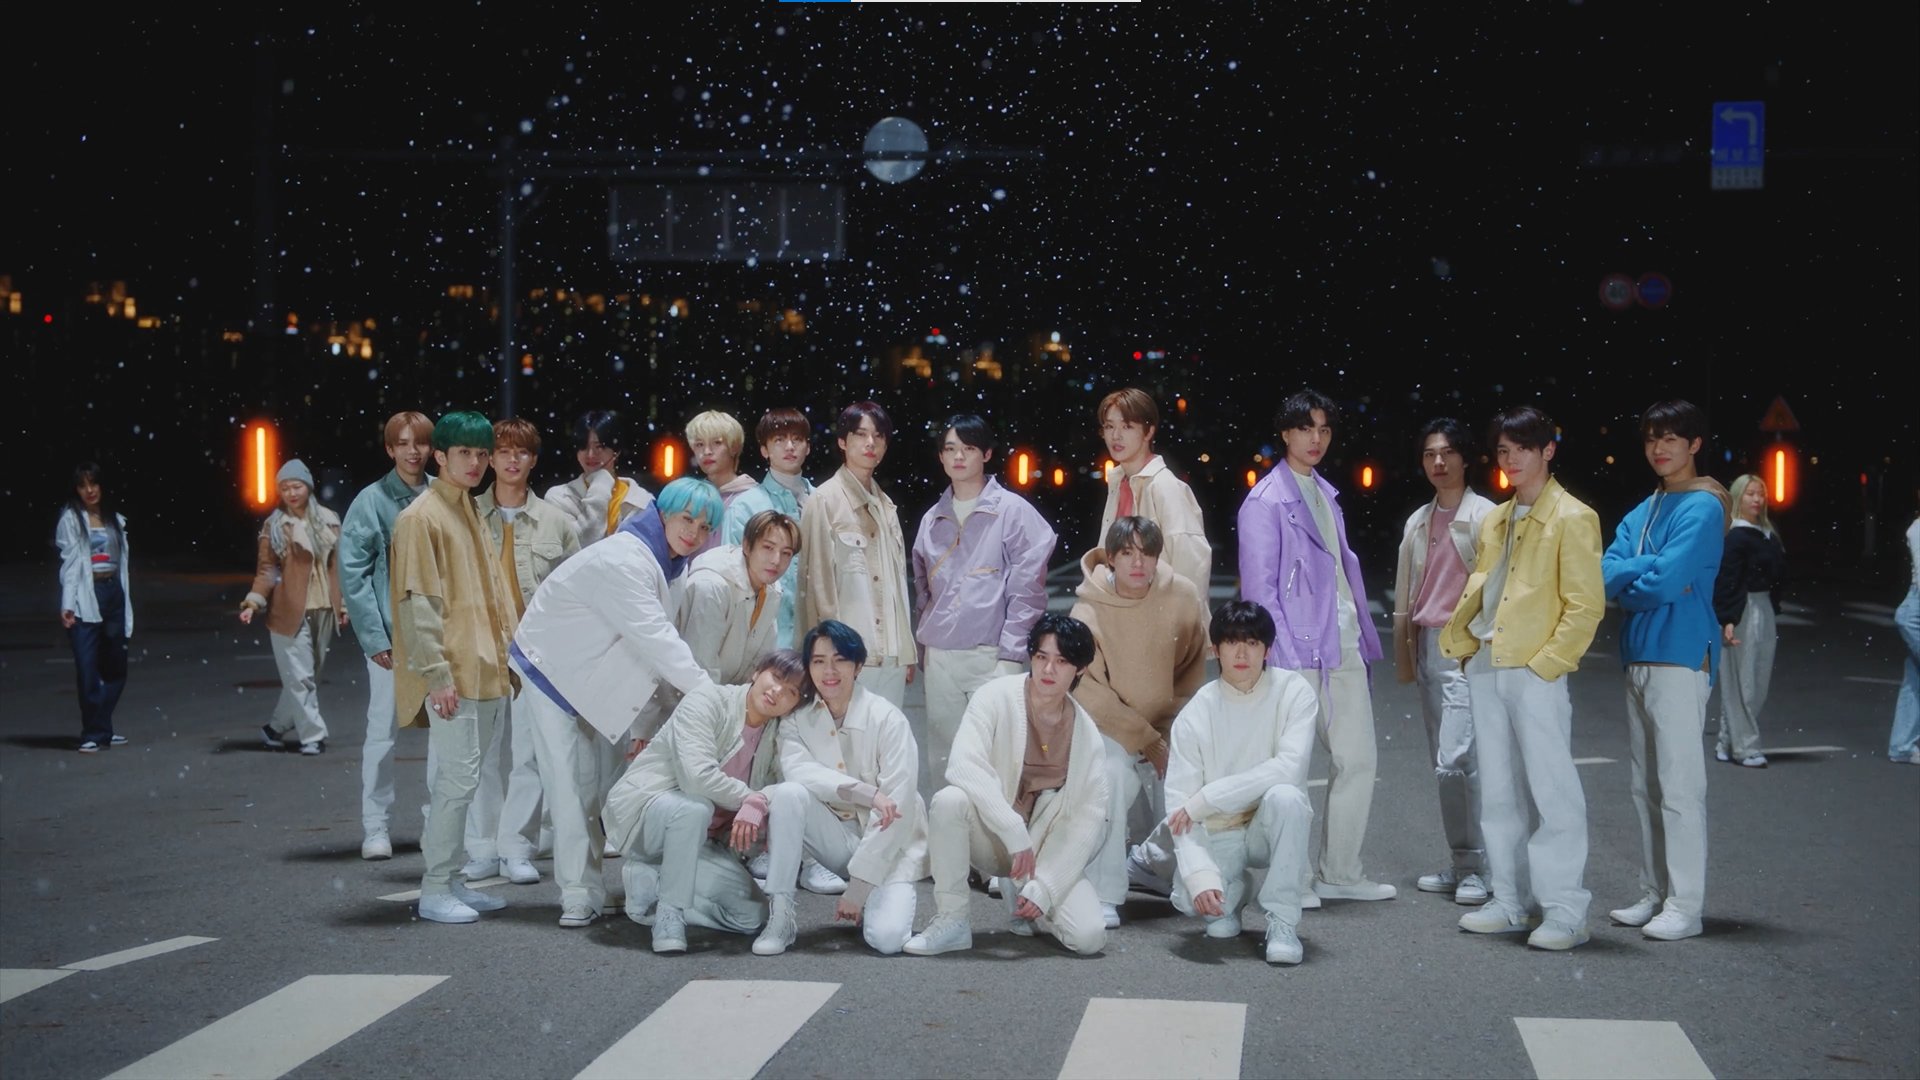 Say hello to NCT 2021 as they share their 3rd full-group release, Universe